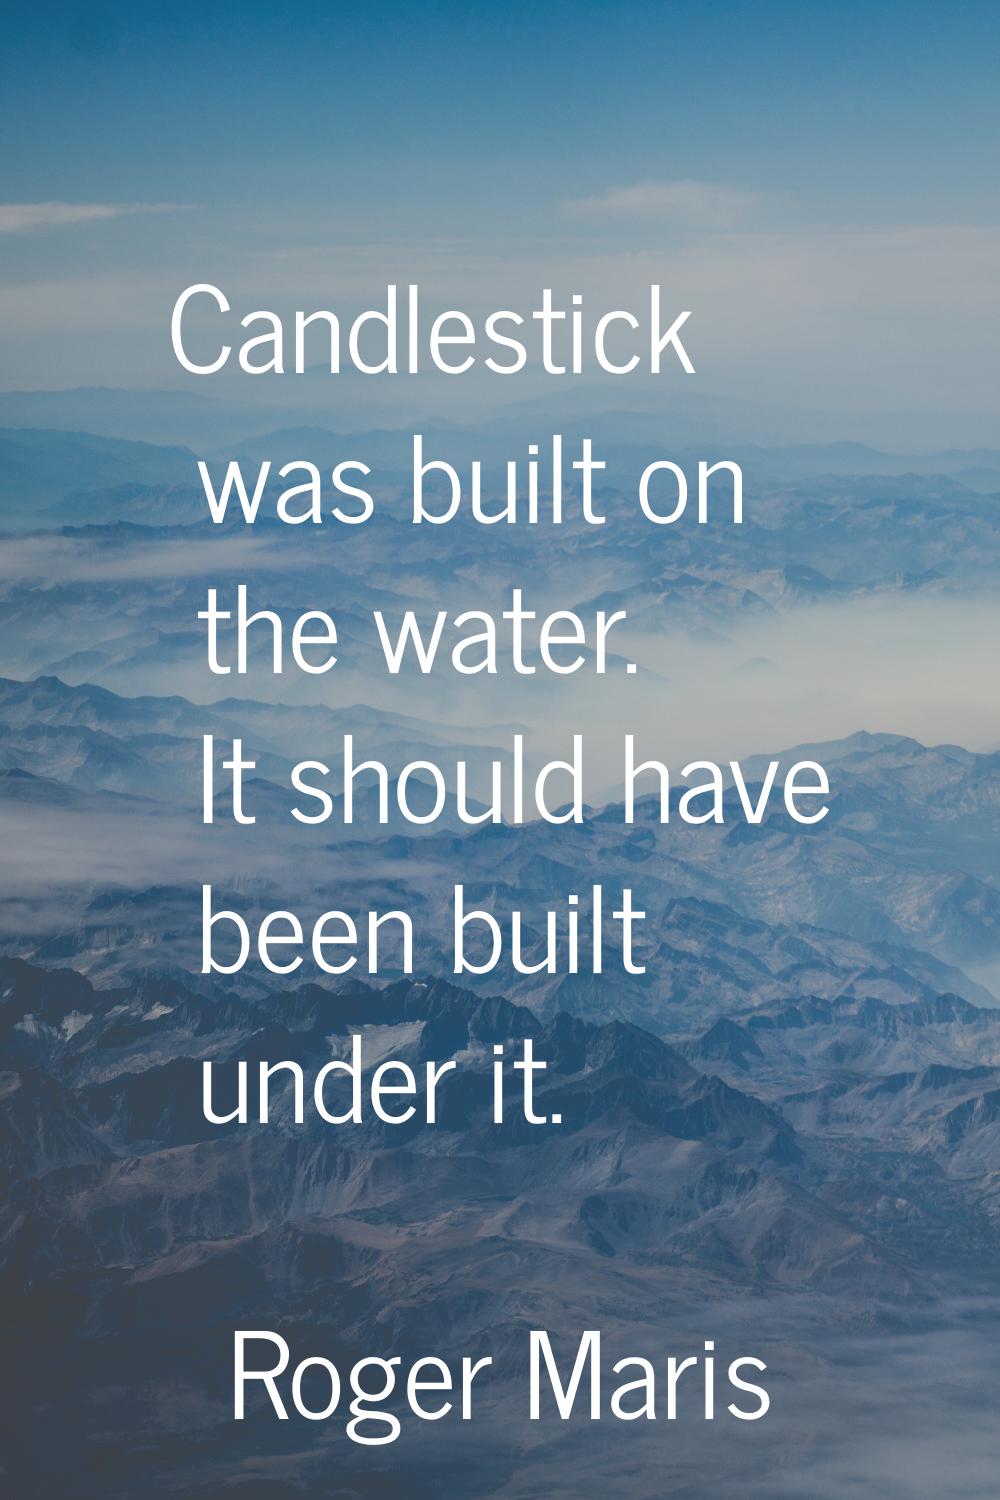 Candlestick was built on the water. It should have been built under it.